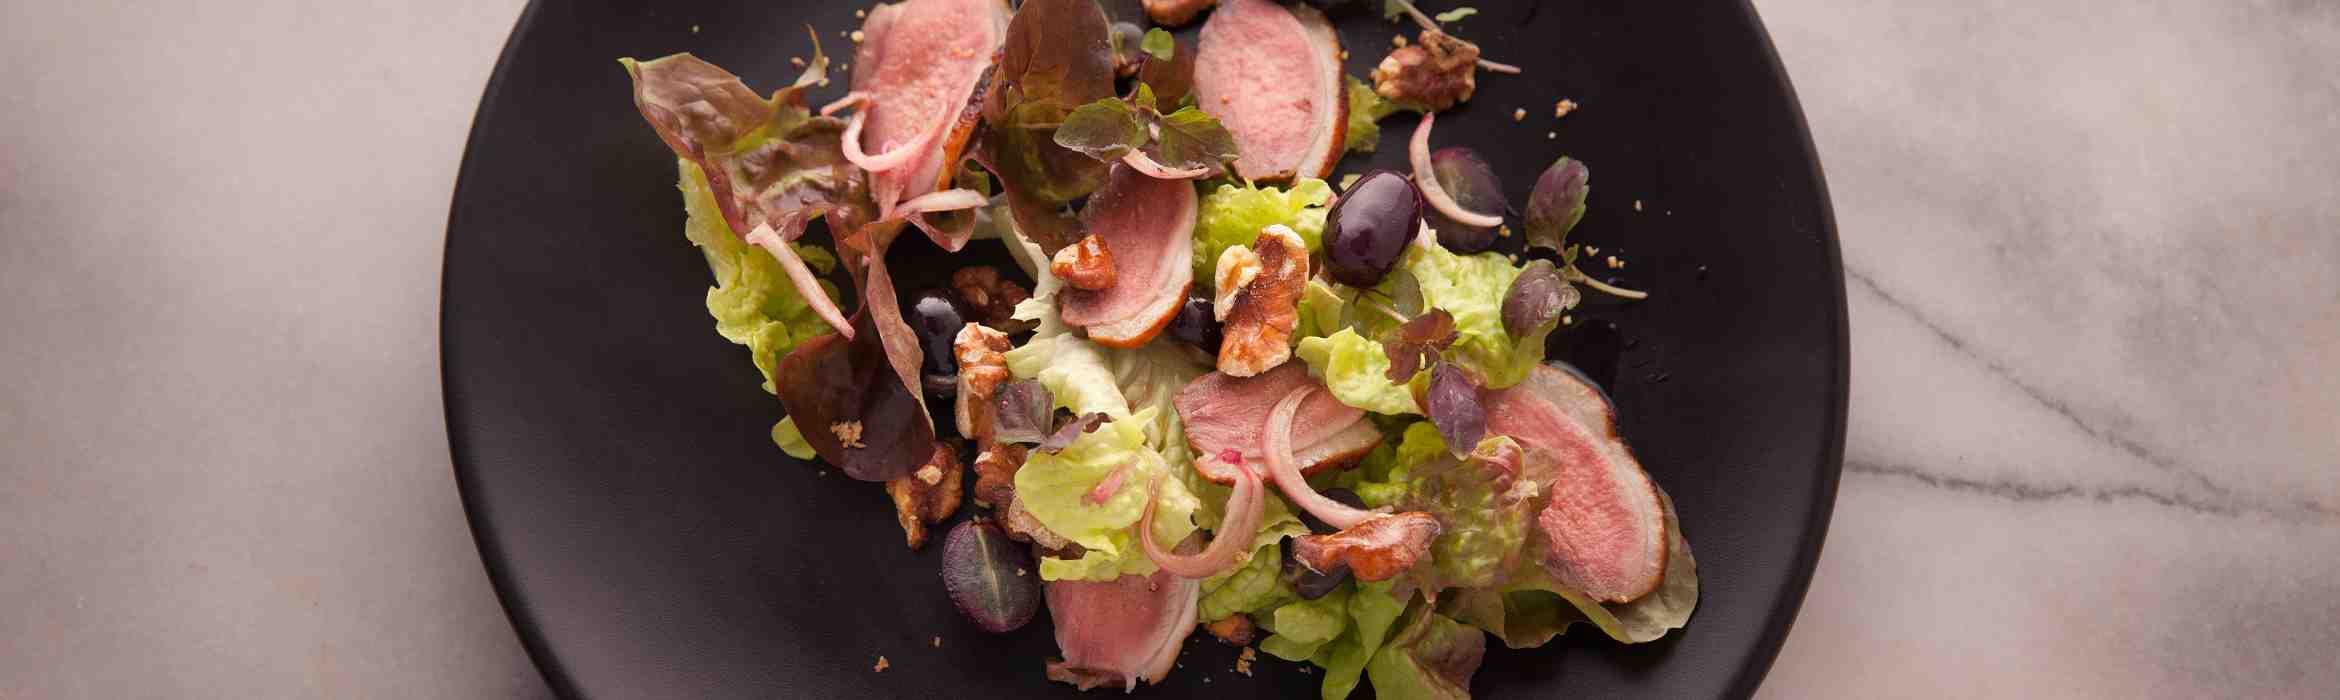 Smoked Duck with Pickled Grapes Recipe